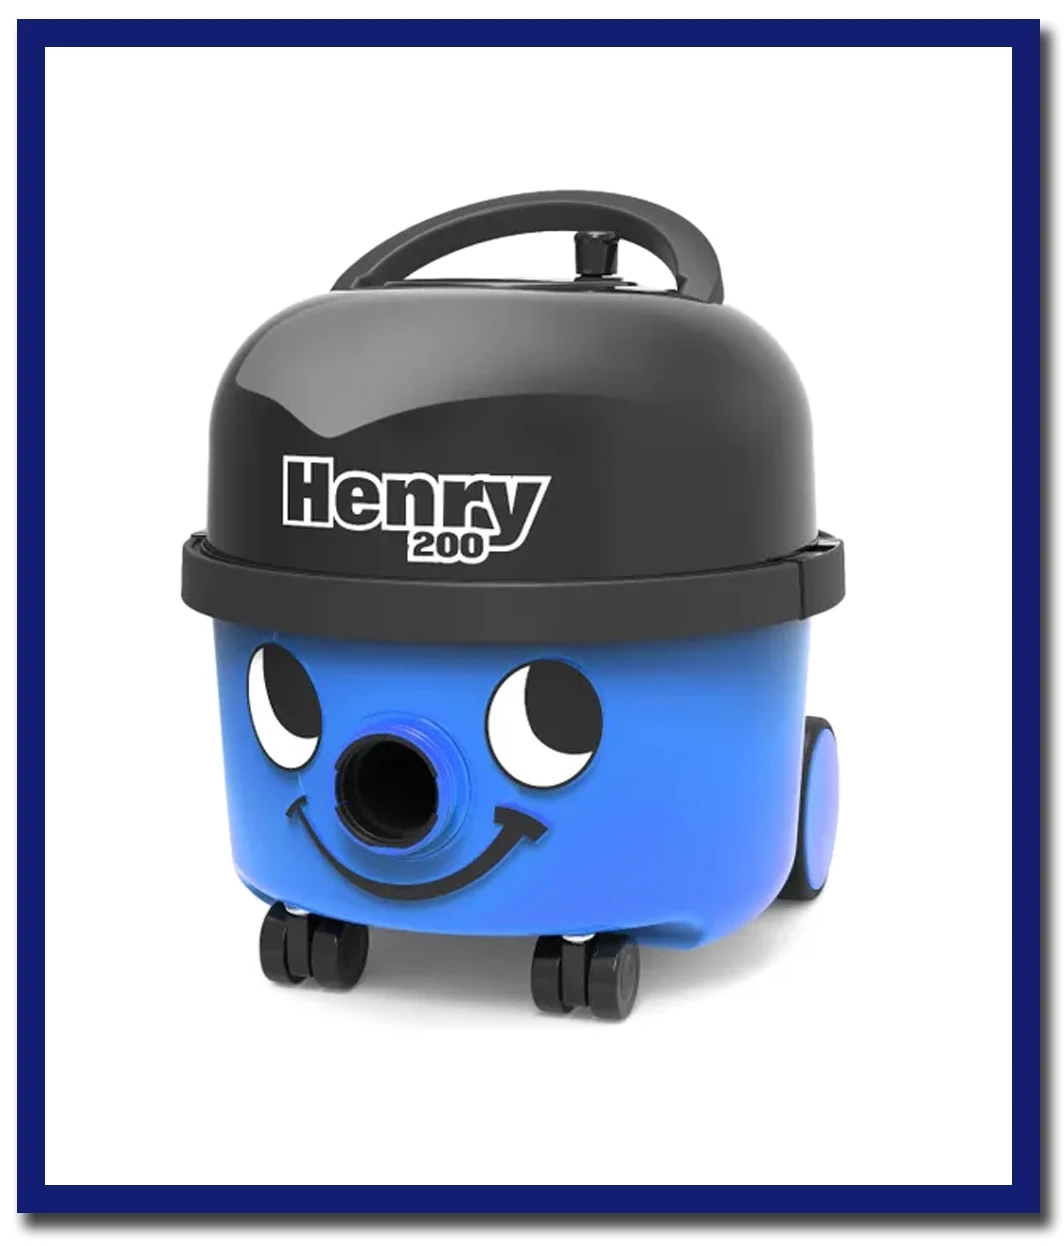 Numatic HVR200 Henry Commercial Dry Vacuum - Stone Doctor Australia - Cleaning Equipment > Machinery > Dry Vacuum